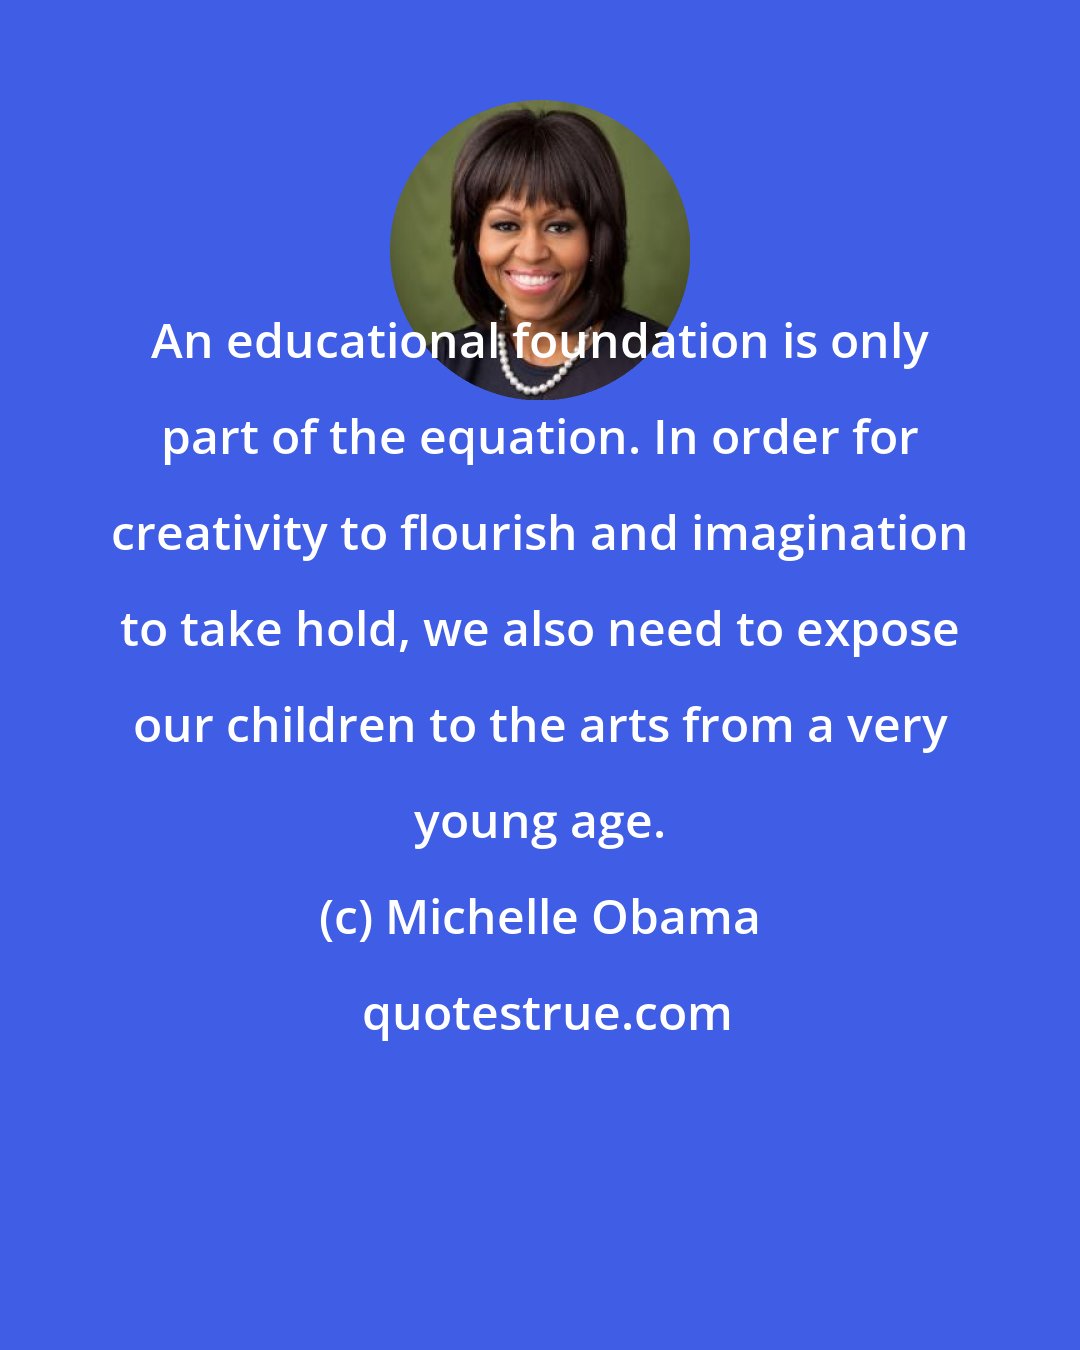 Michelle Obama: An educational foundation is only part of the equation. In order for creativity to flourish and imagination to take hold, we also need to expose our children to the arts from a very young age.